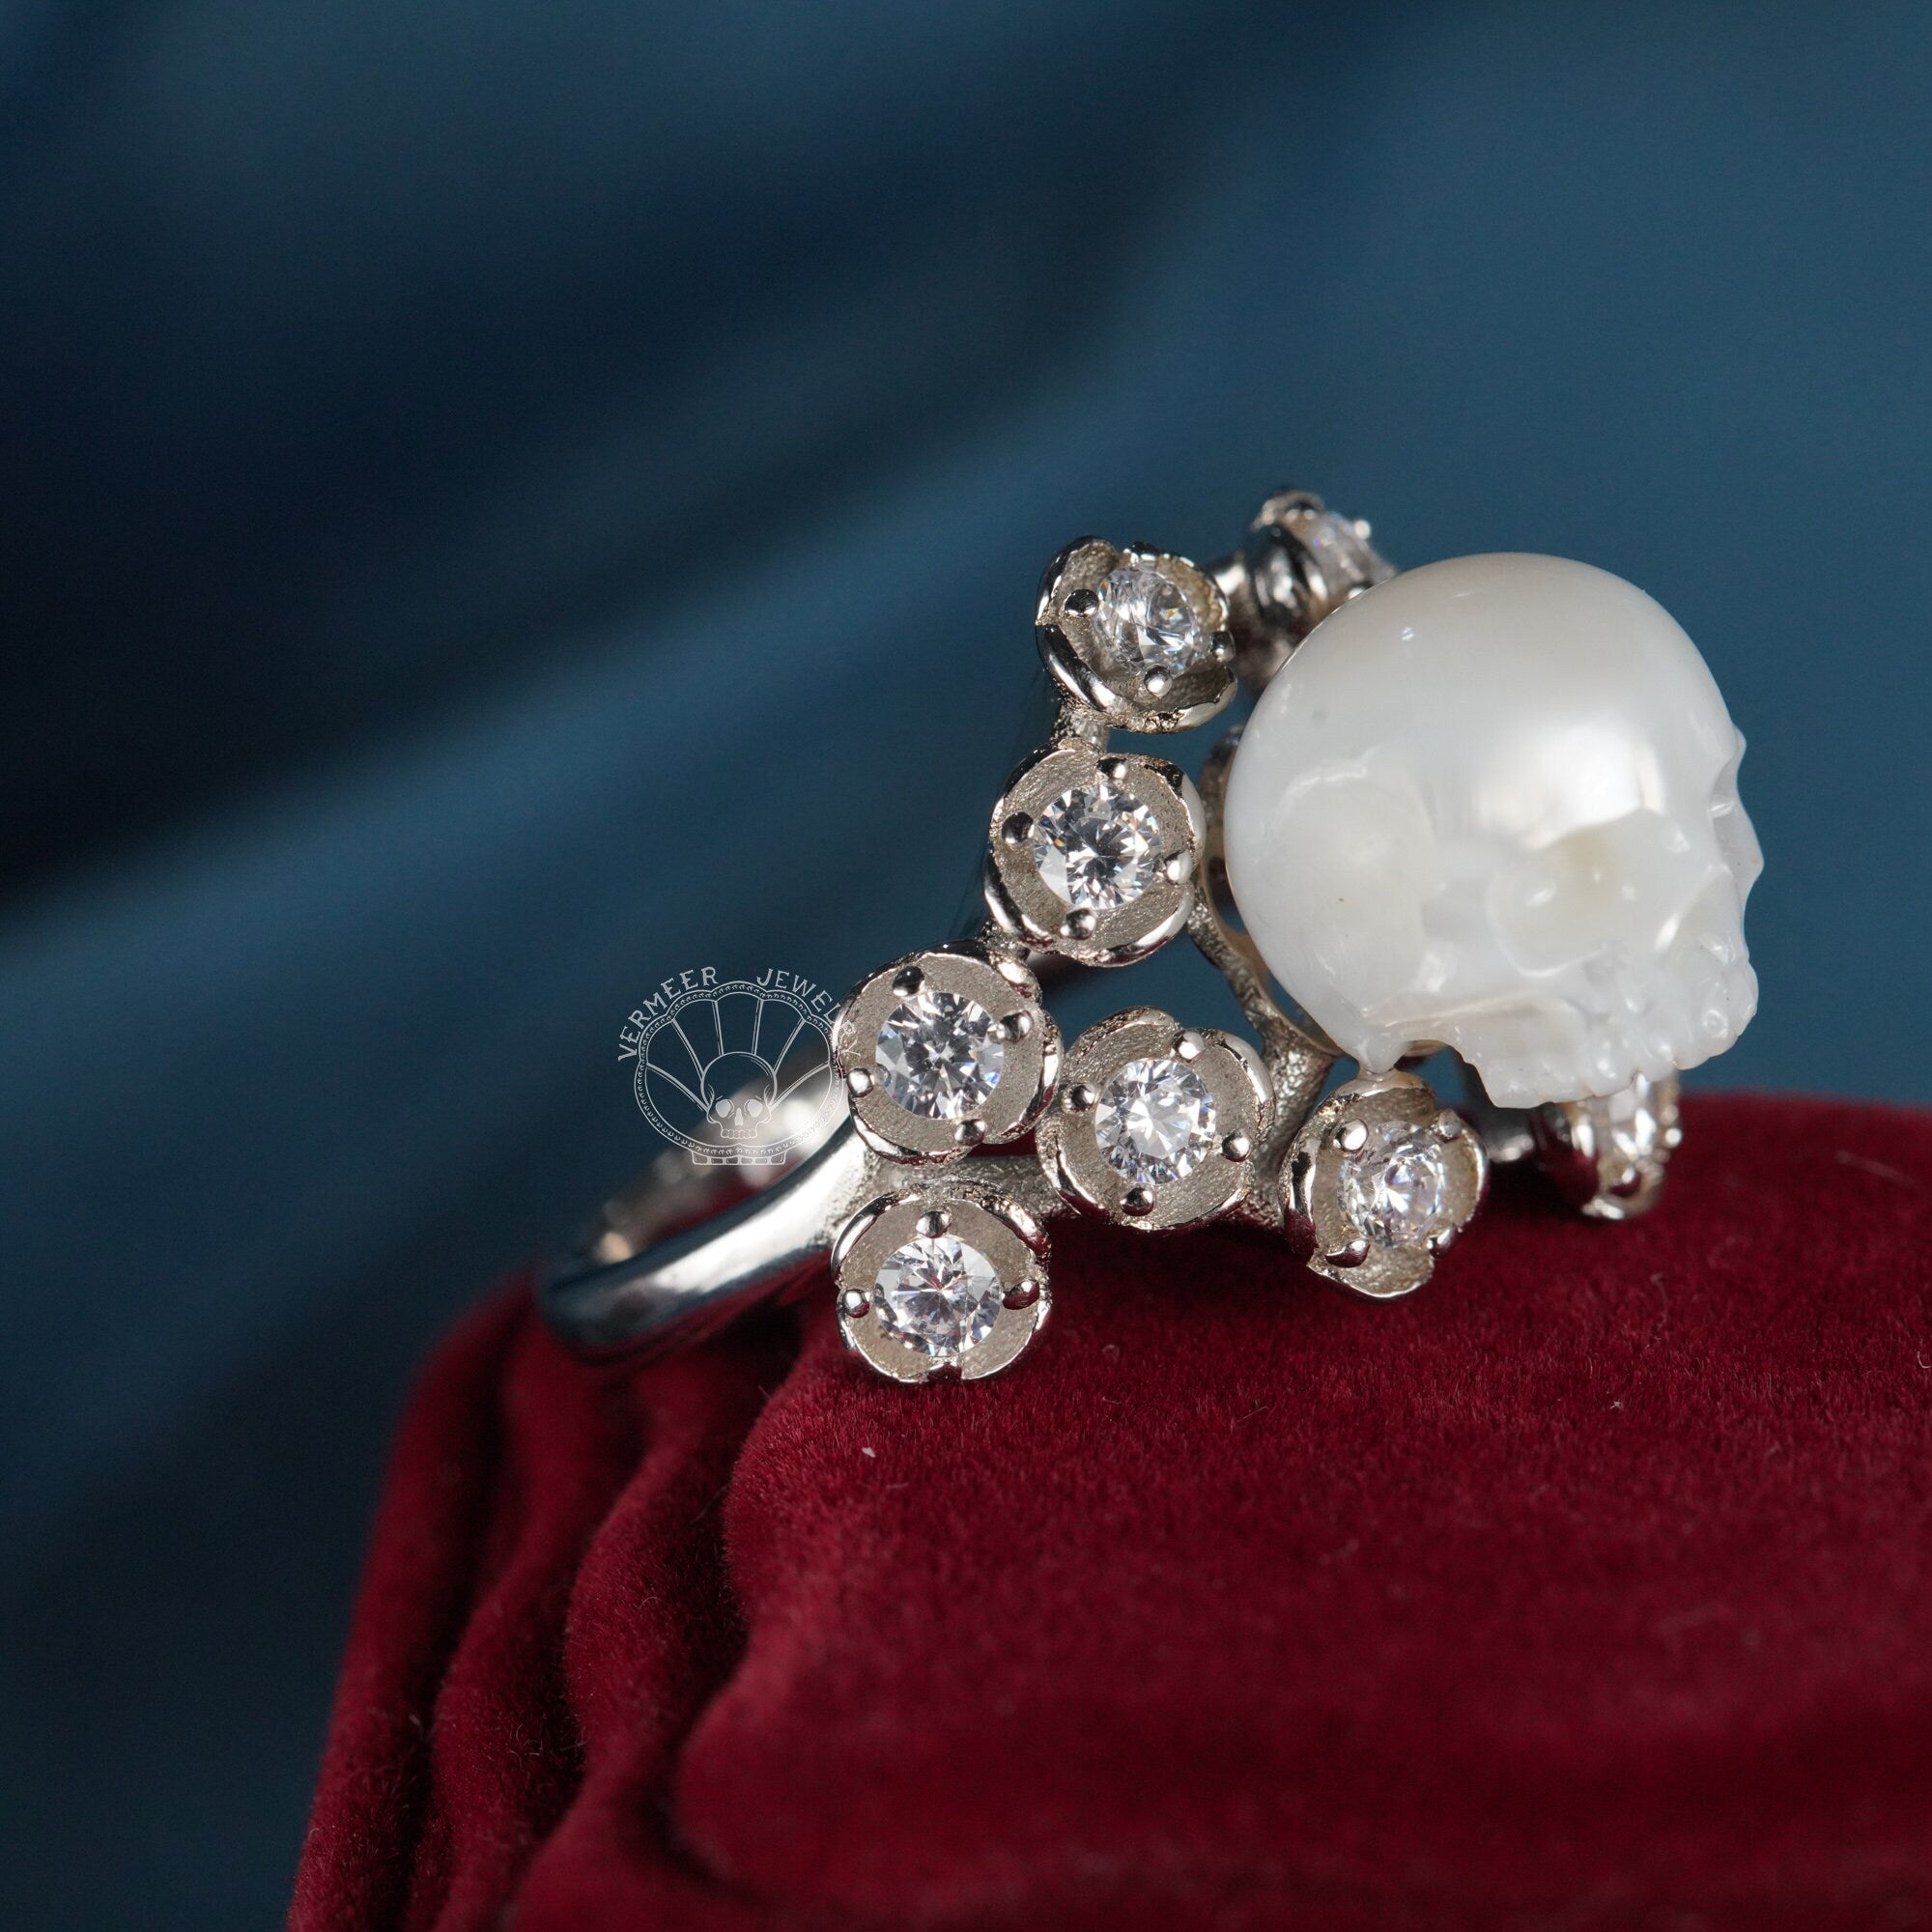 pearl skull ring with shining gem flower sterling silver rings gothic dark jewelry engagement ring for wedding